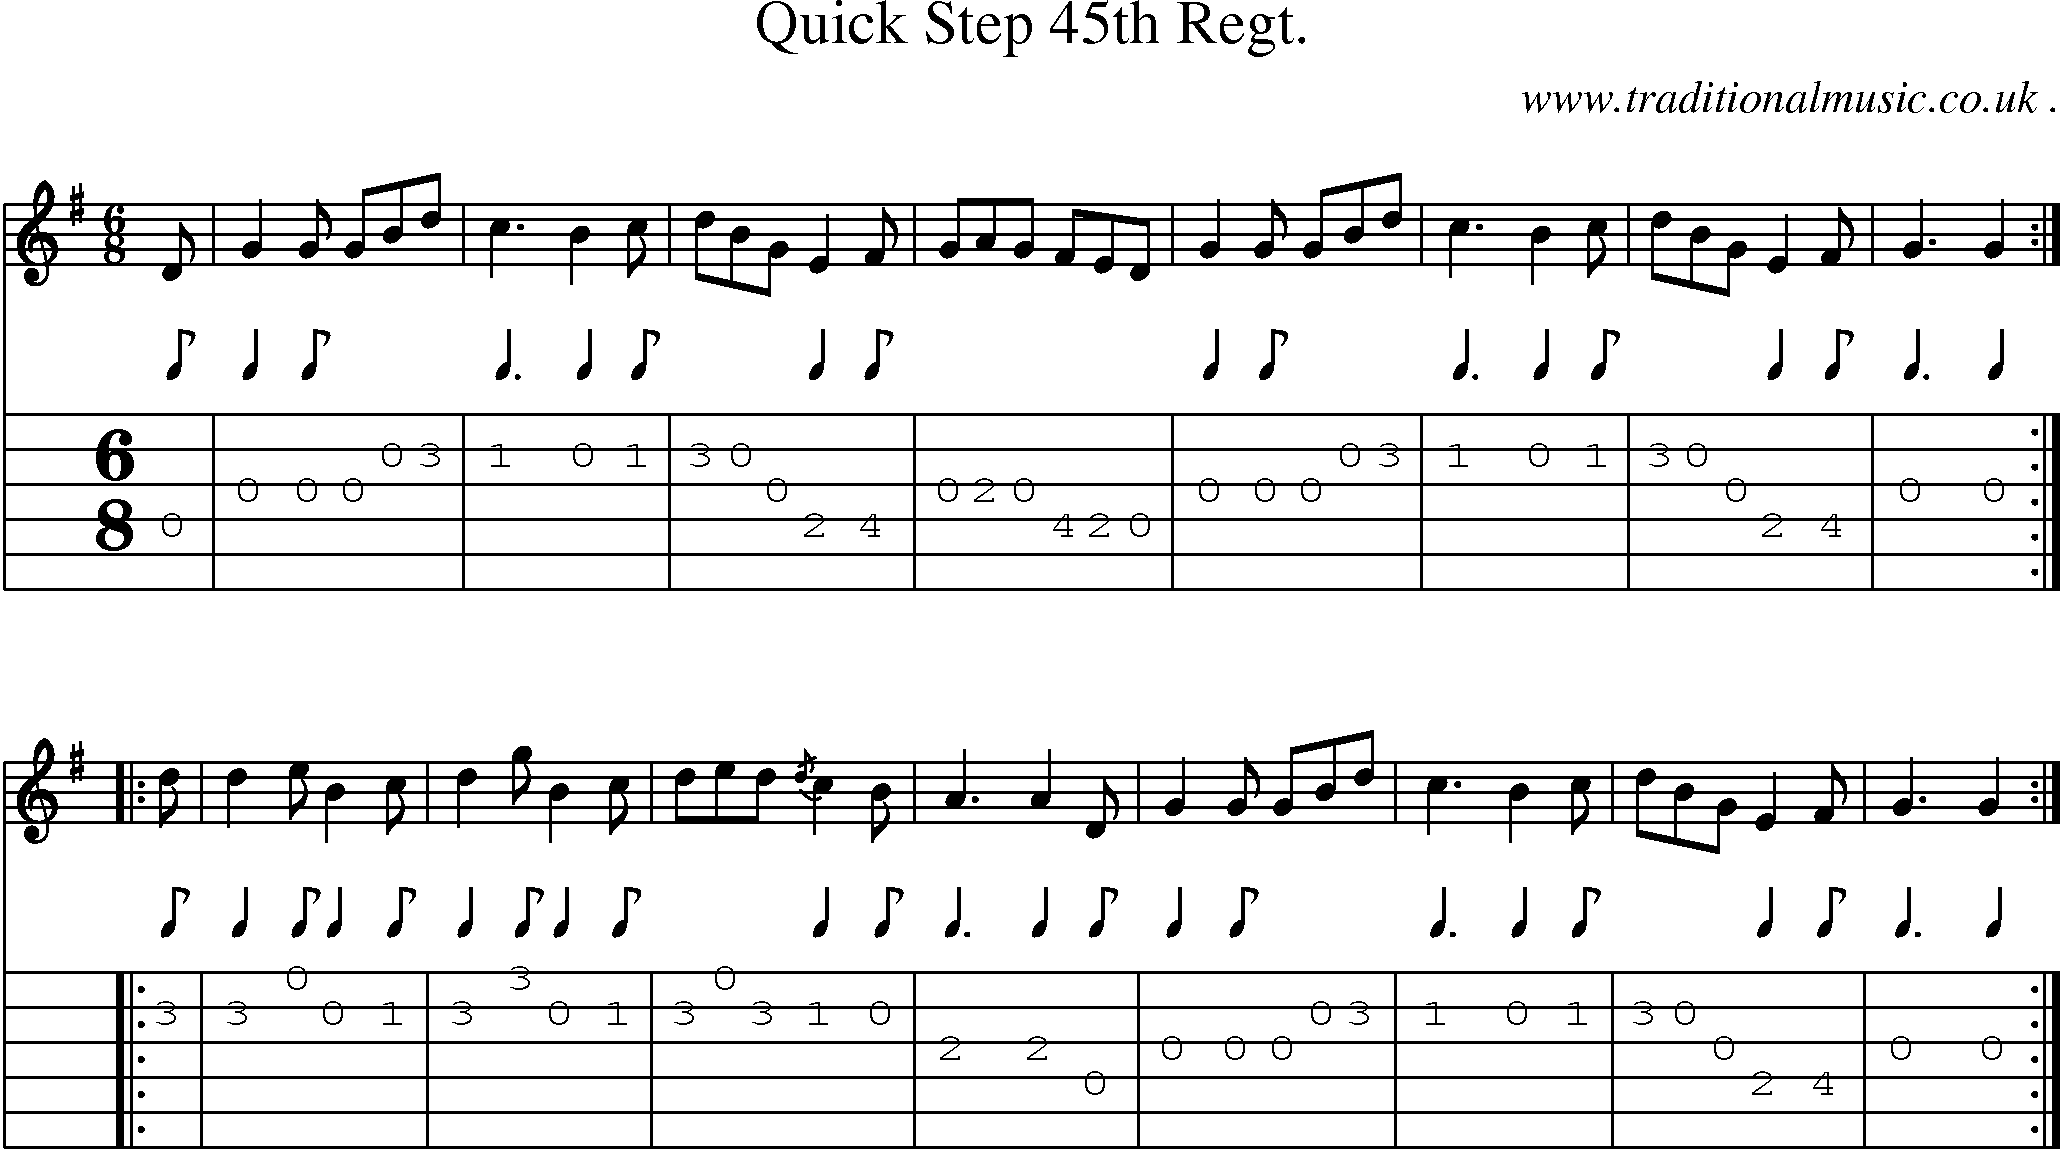 Sheet-music  score, Chords and Guitar Tabs for Quick Step 45th Regt